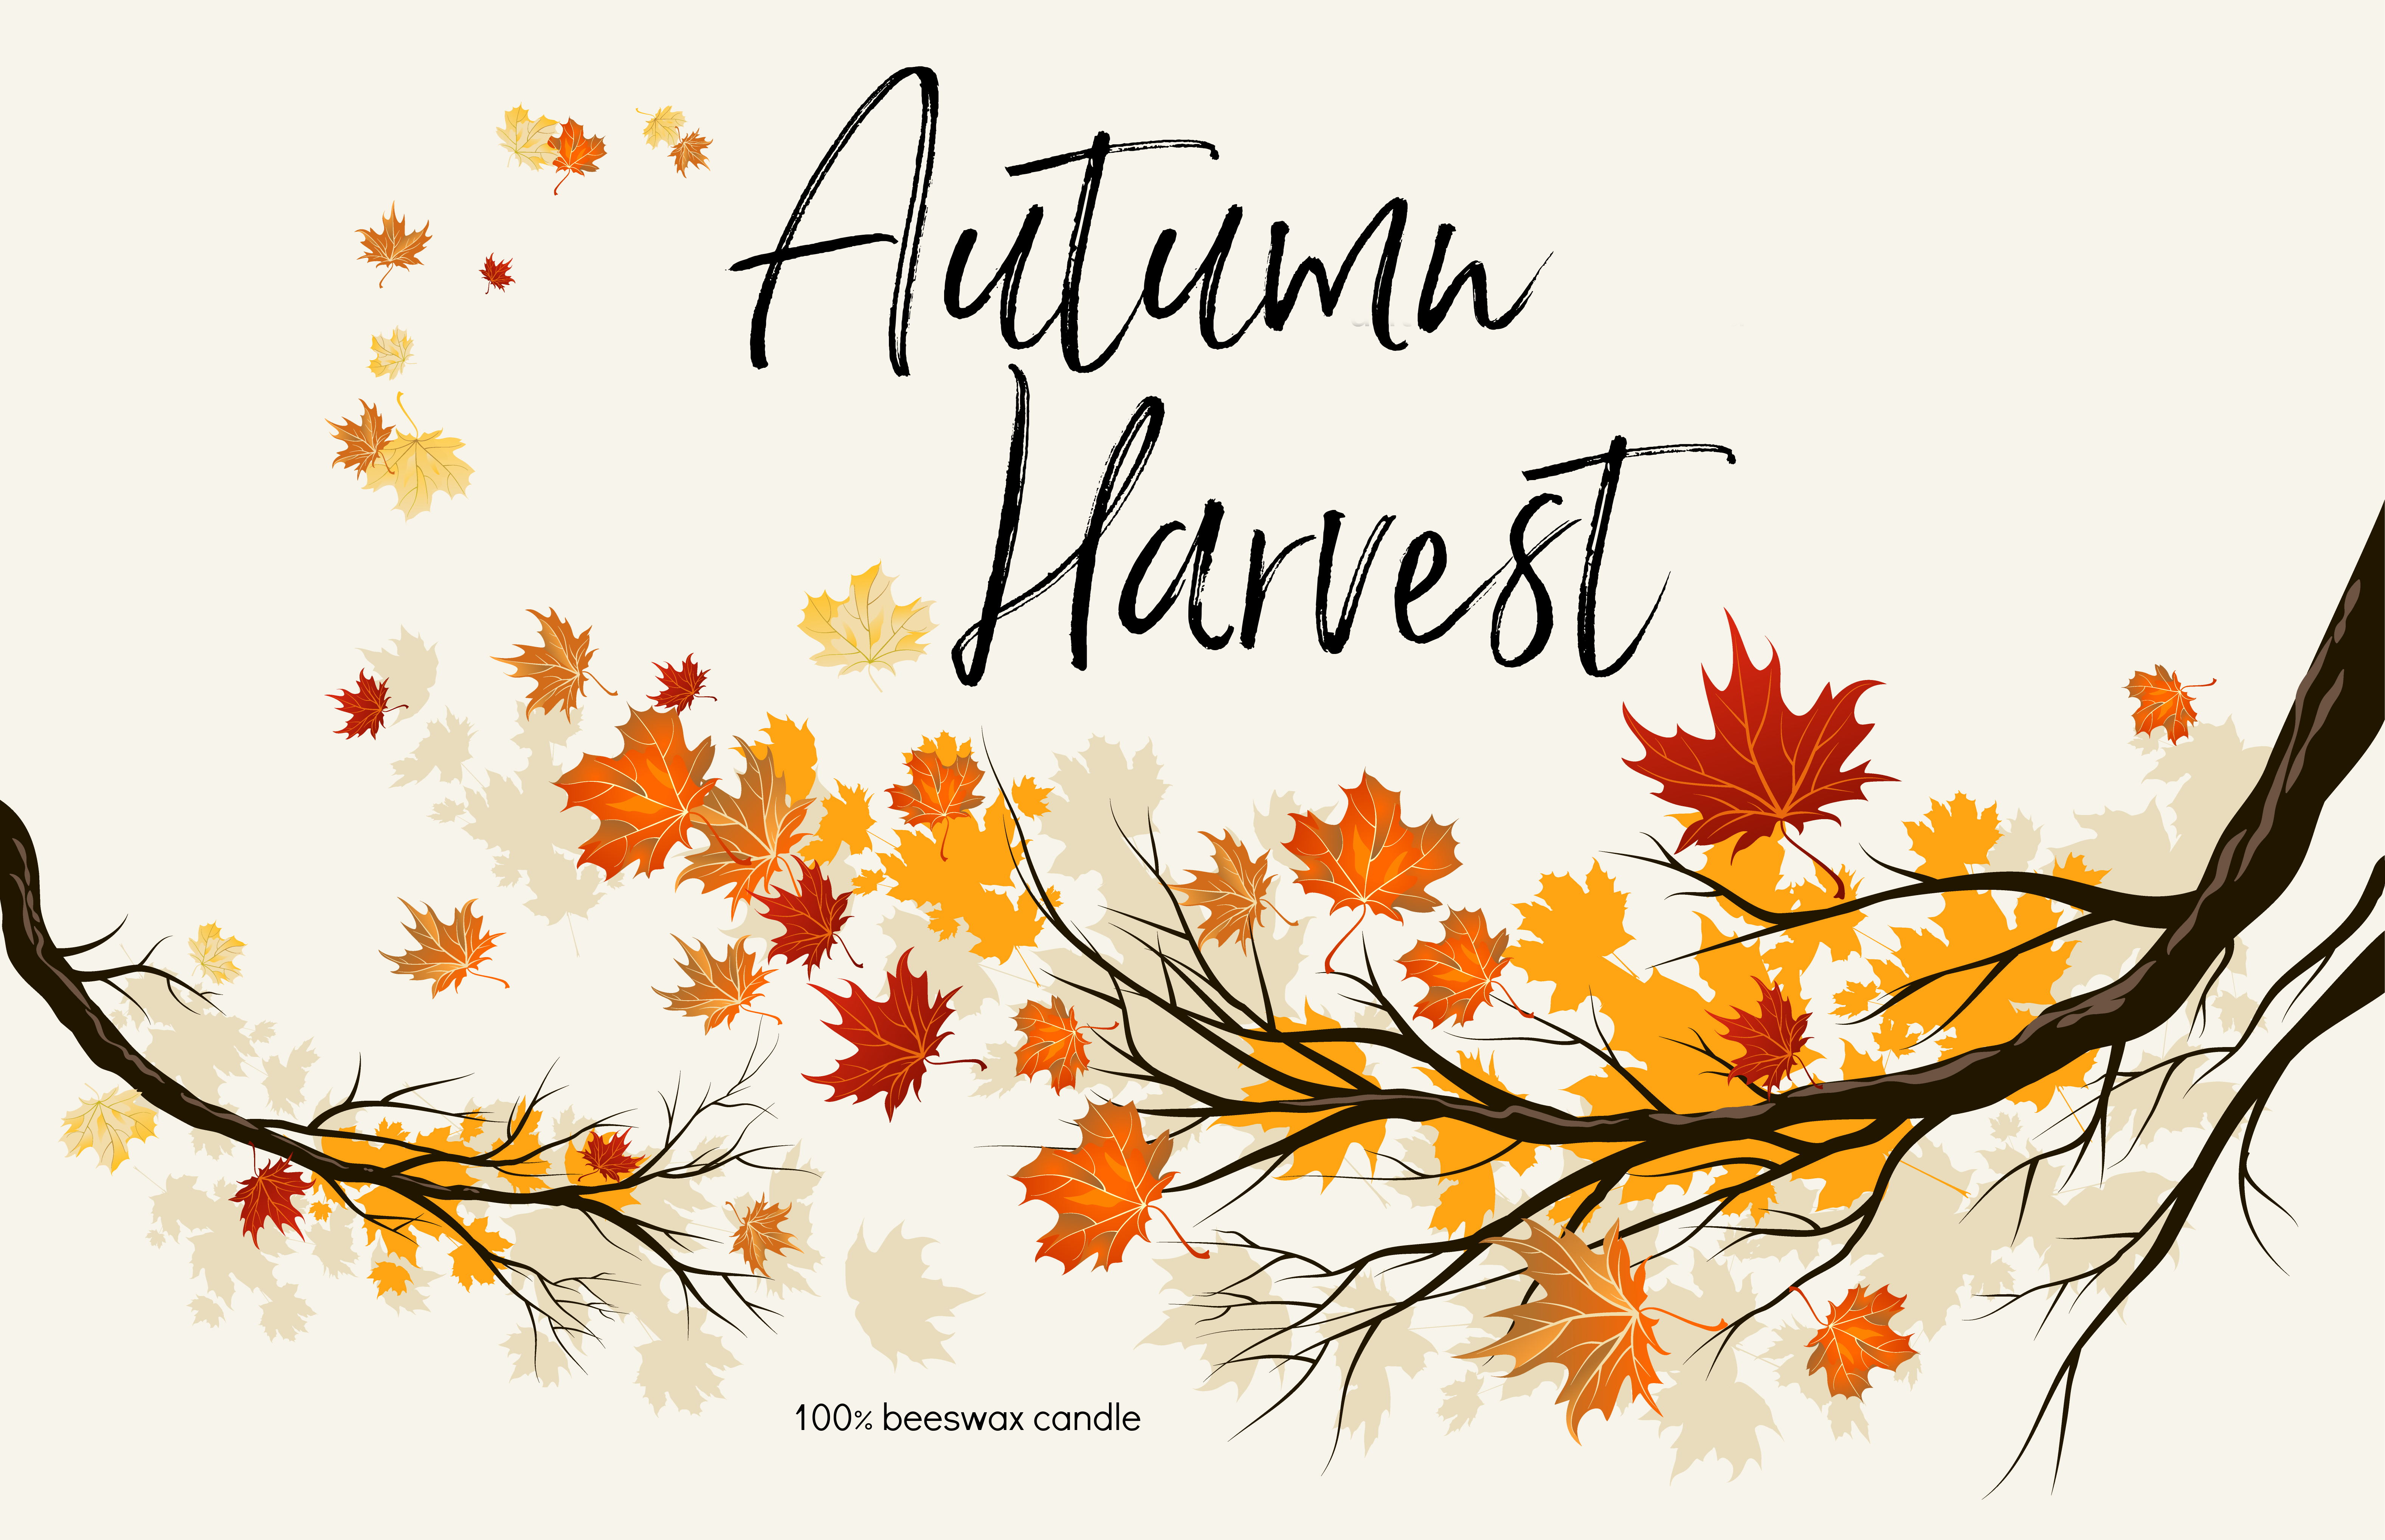 A printable jar label saying autumn harvest with a branch and autumn leaves.